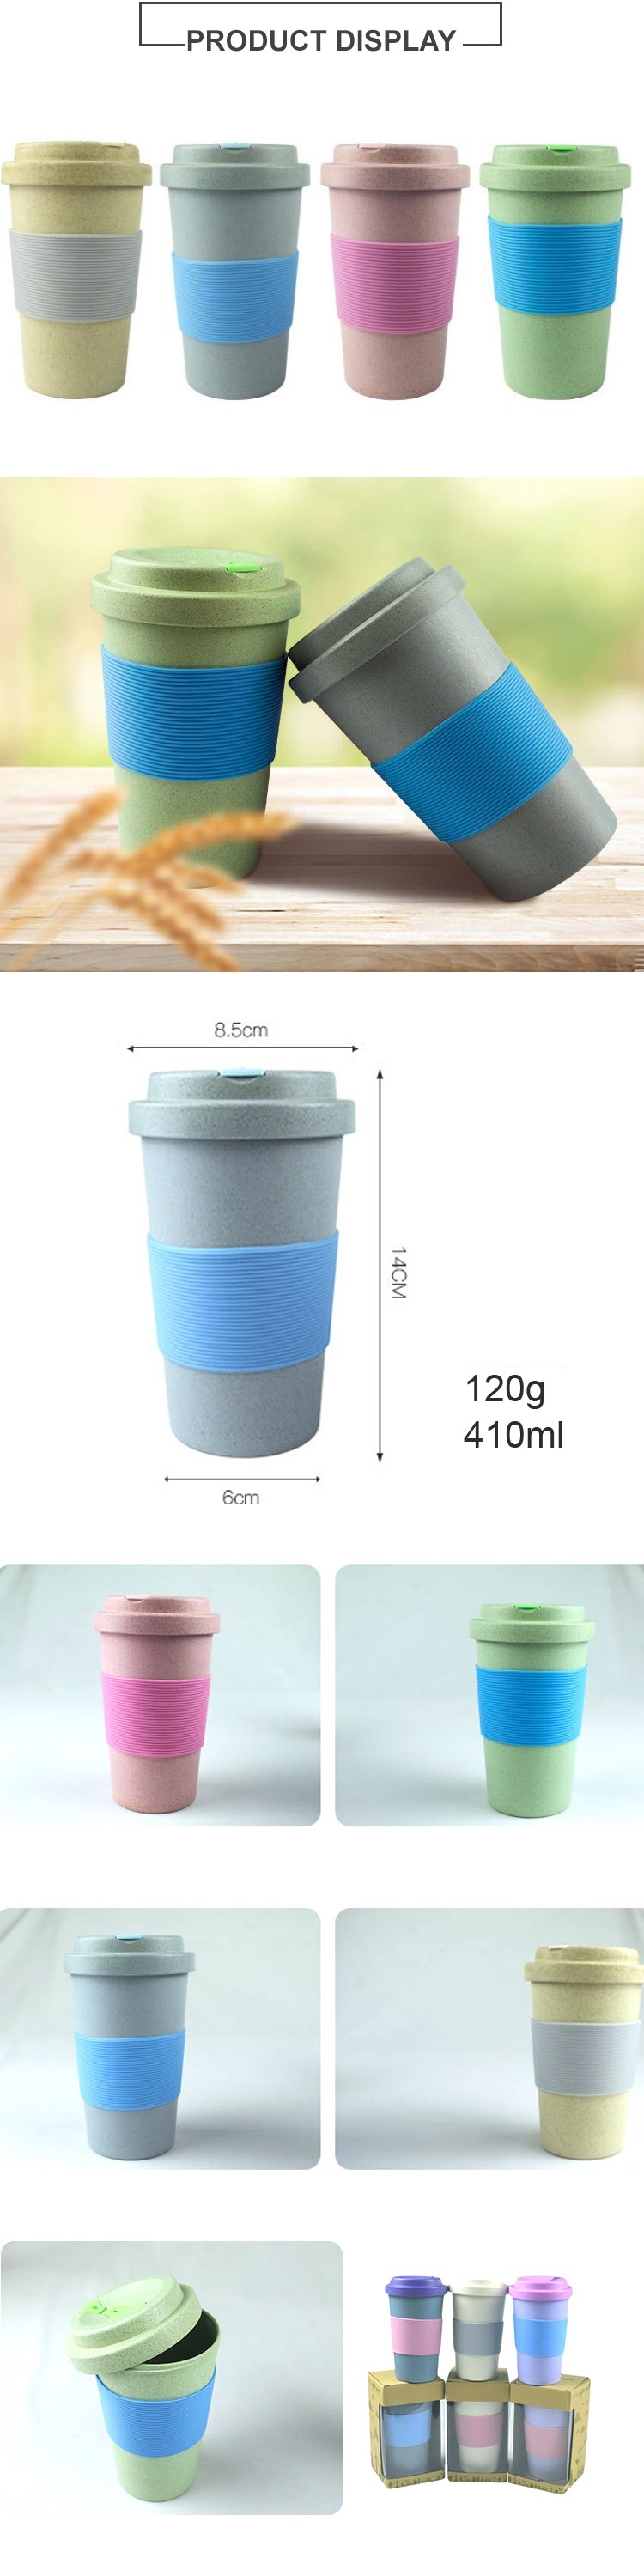 Wholesale custom eco friendly reusable biodegradable plastics wheat straw coffee cups with lid for travel